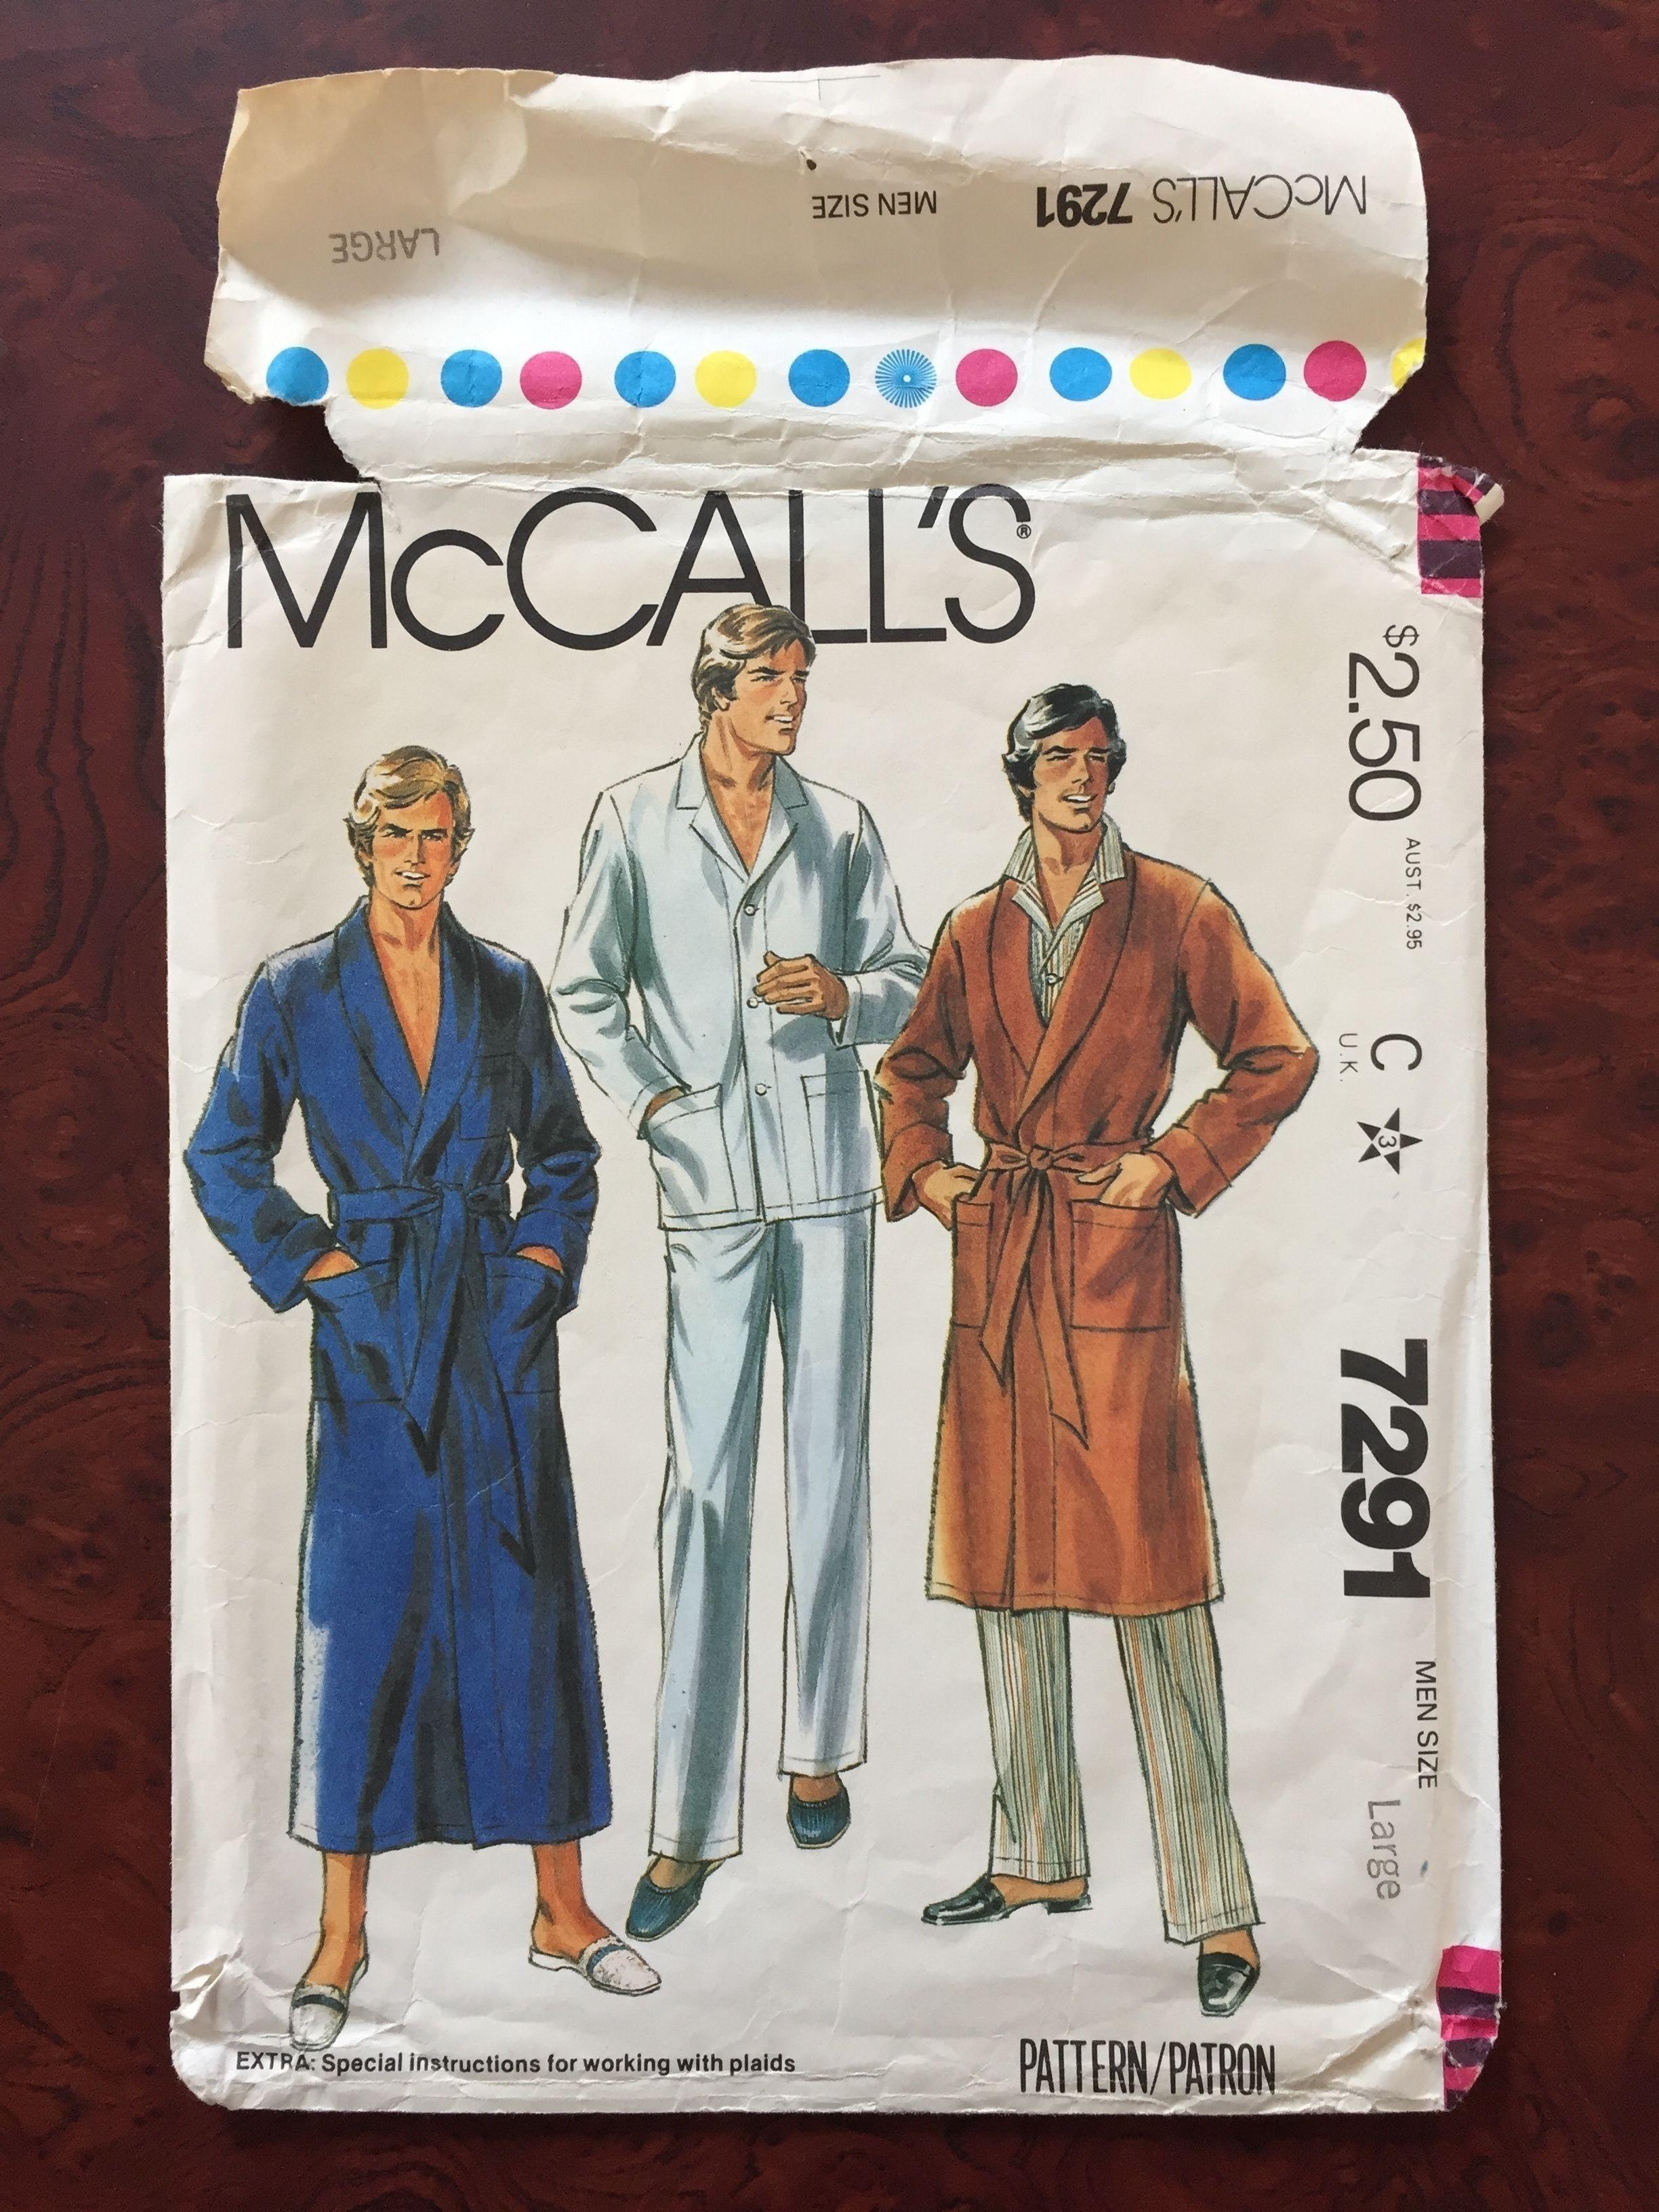 McCall's Logo - McCall's patterns logo and packaging - Fonts In Use